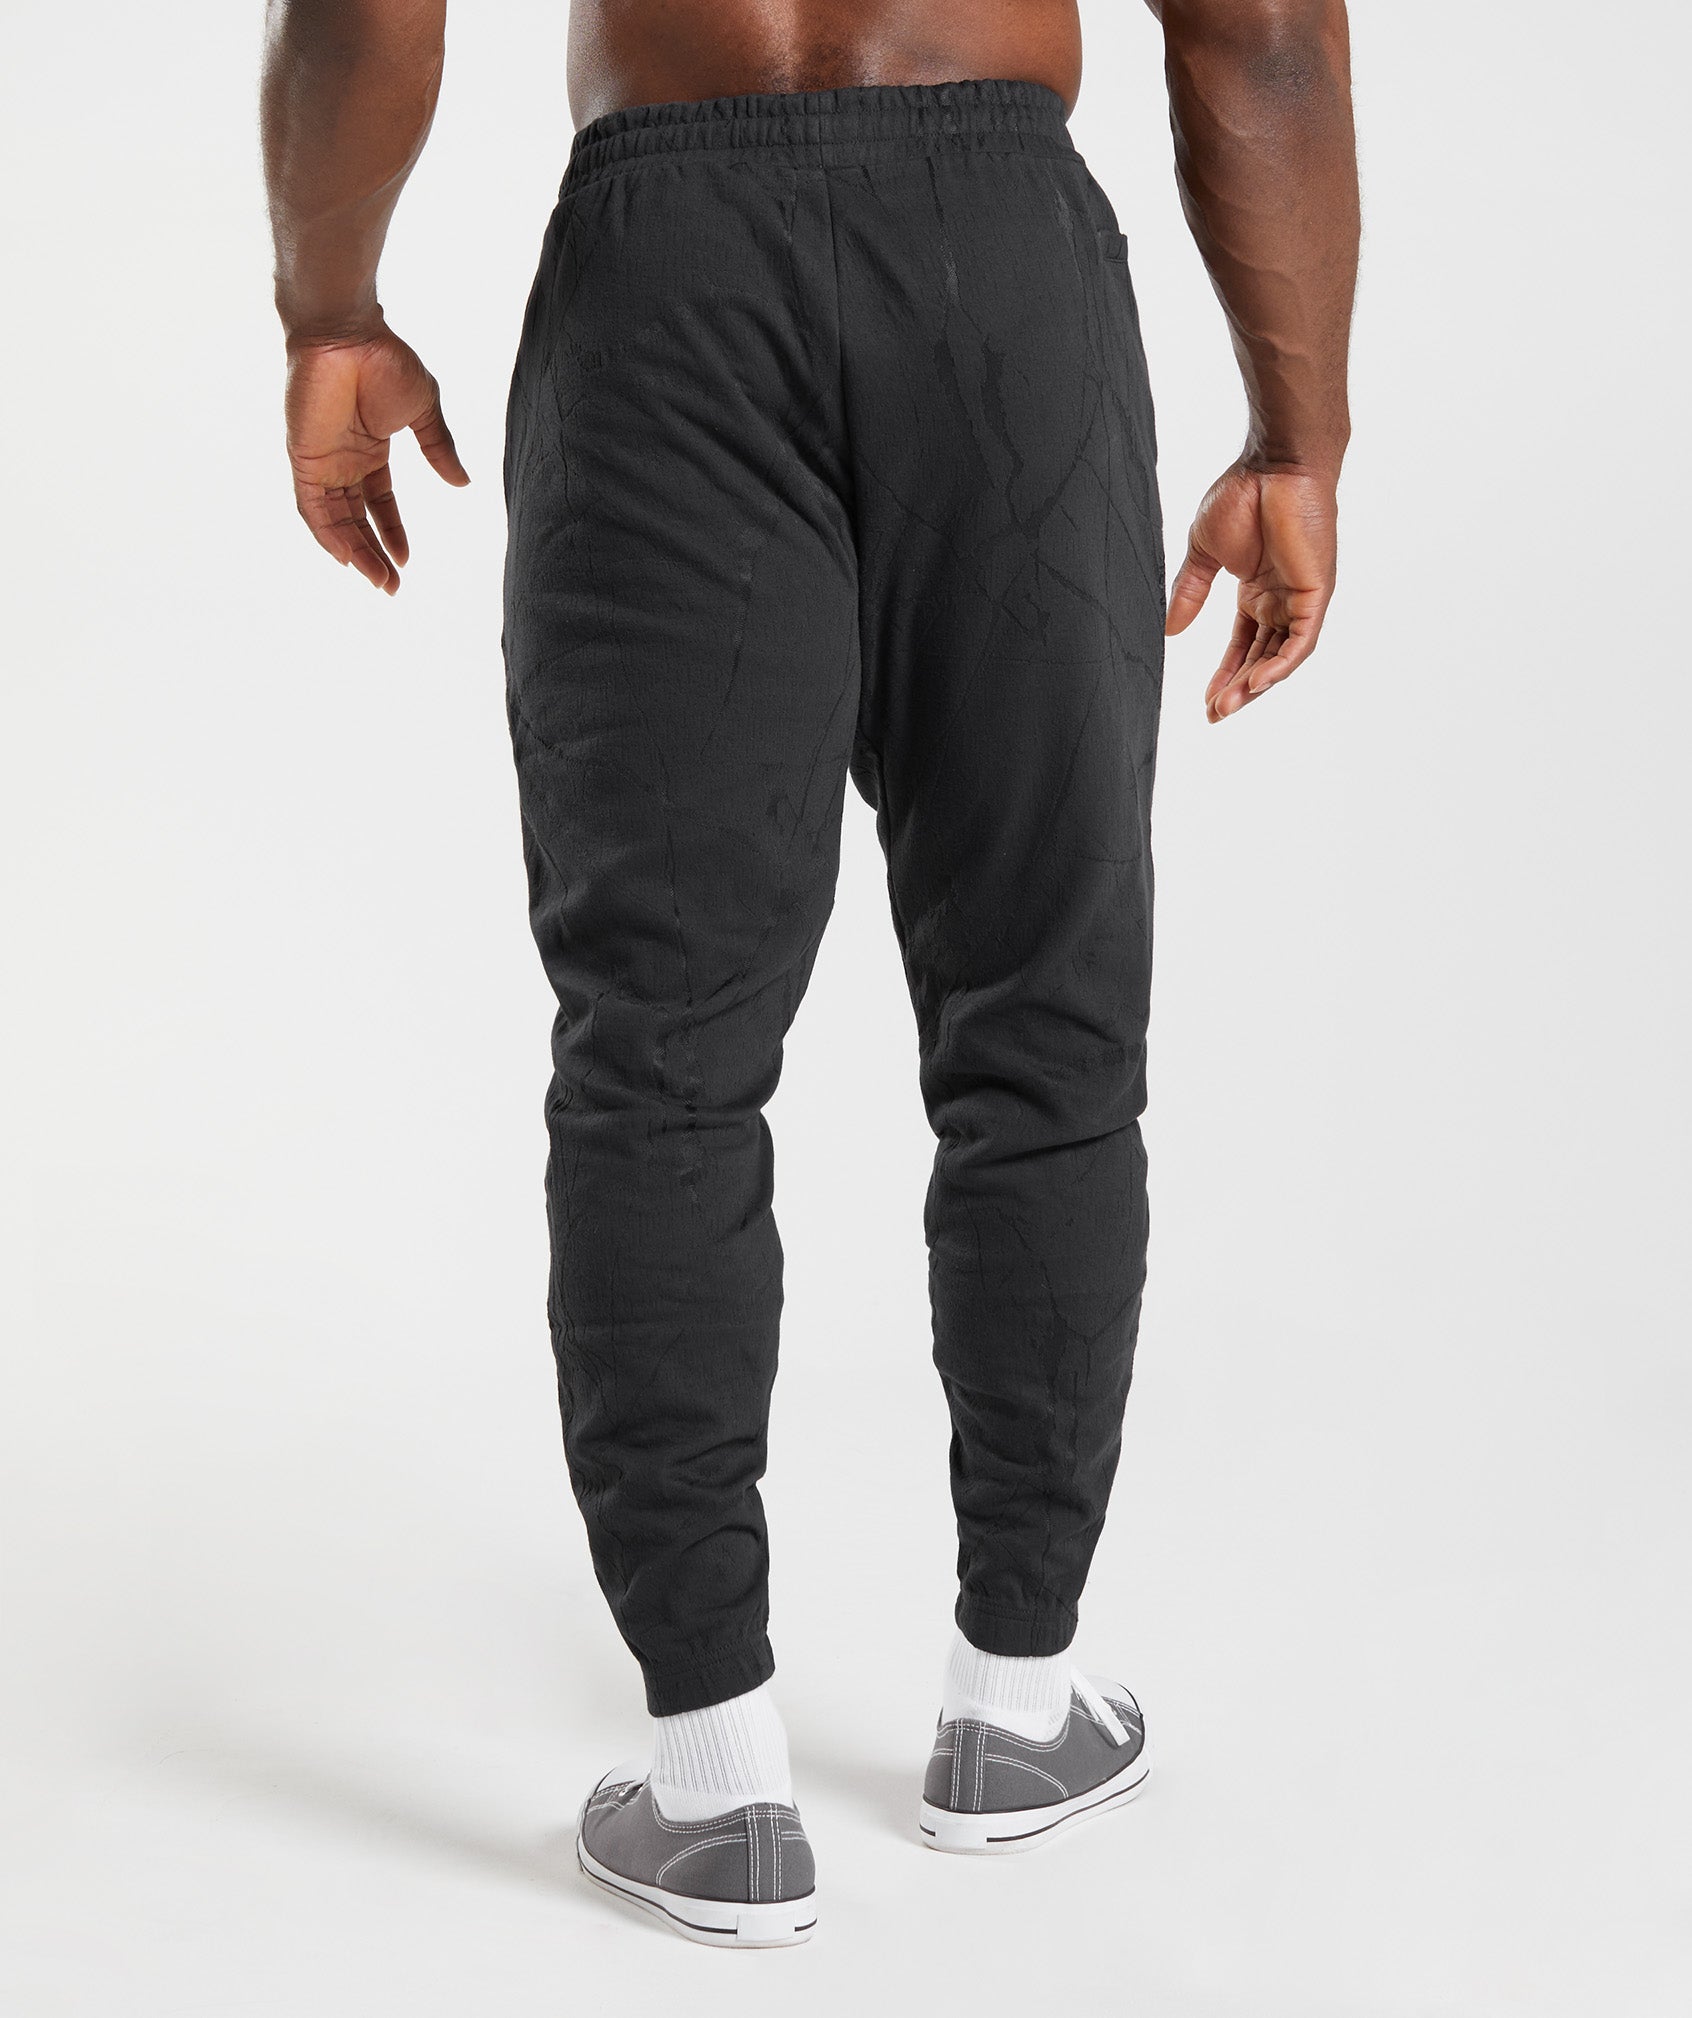 Power Joggers in Black Print - view 2